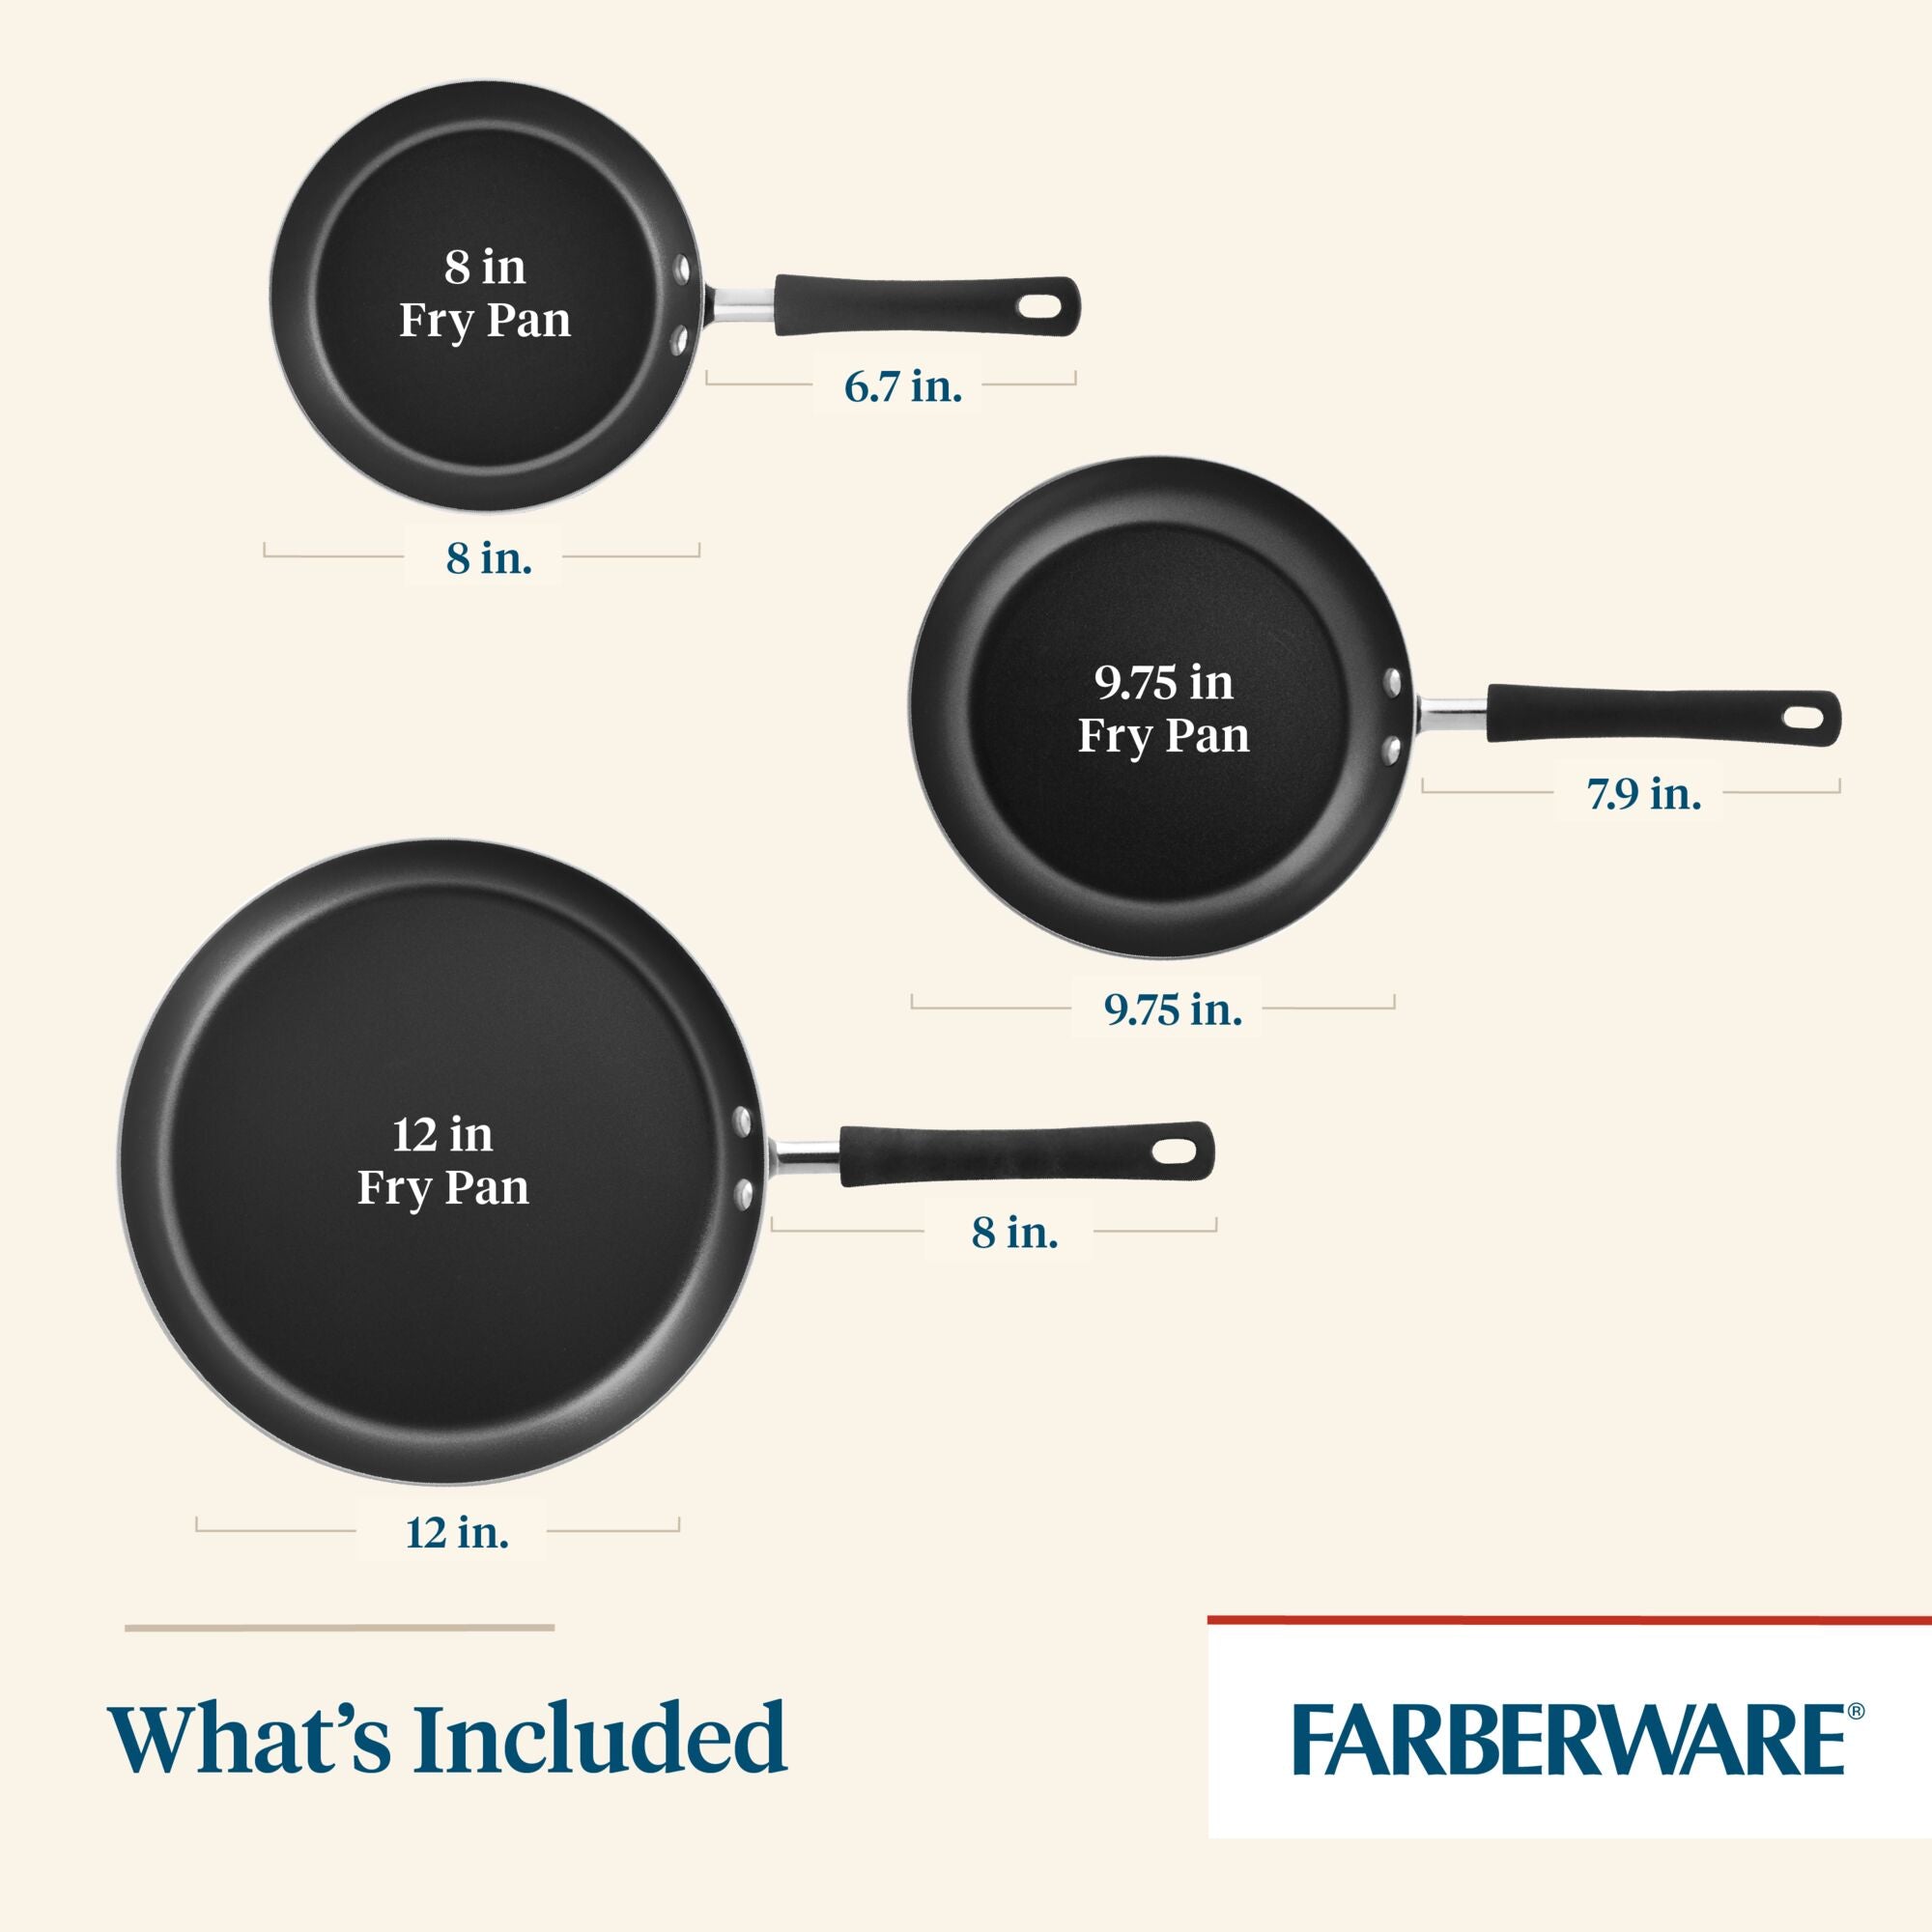 Farberware 14-inch Easy Clean Aluminum Non-Stick Frying Pans/Fry Pan/Skillet with Helper Handle, Black